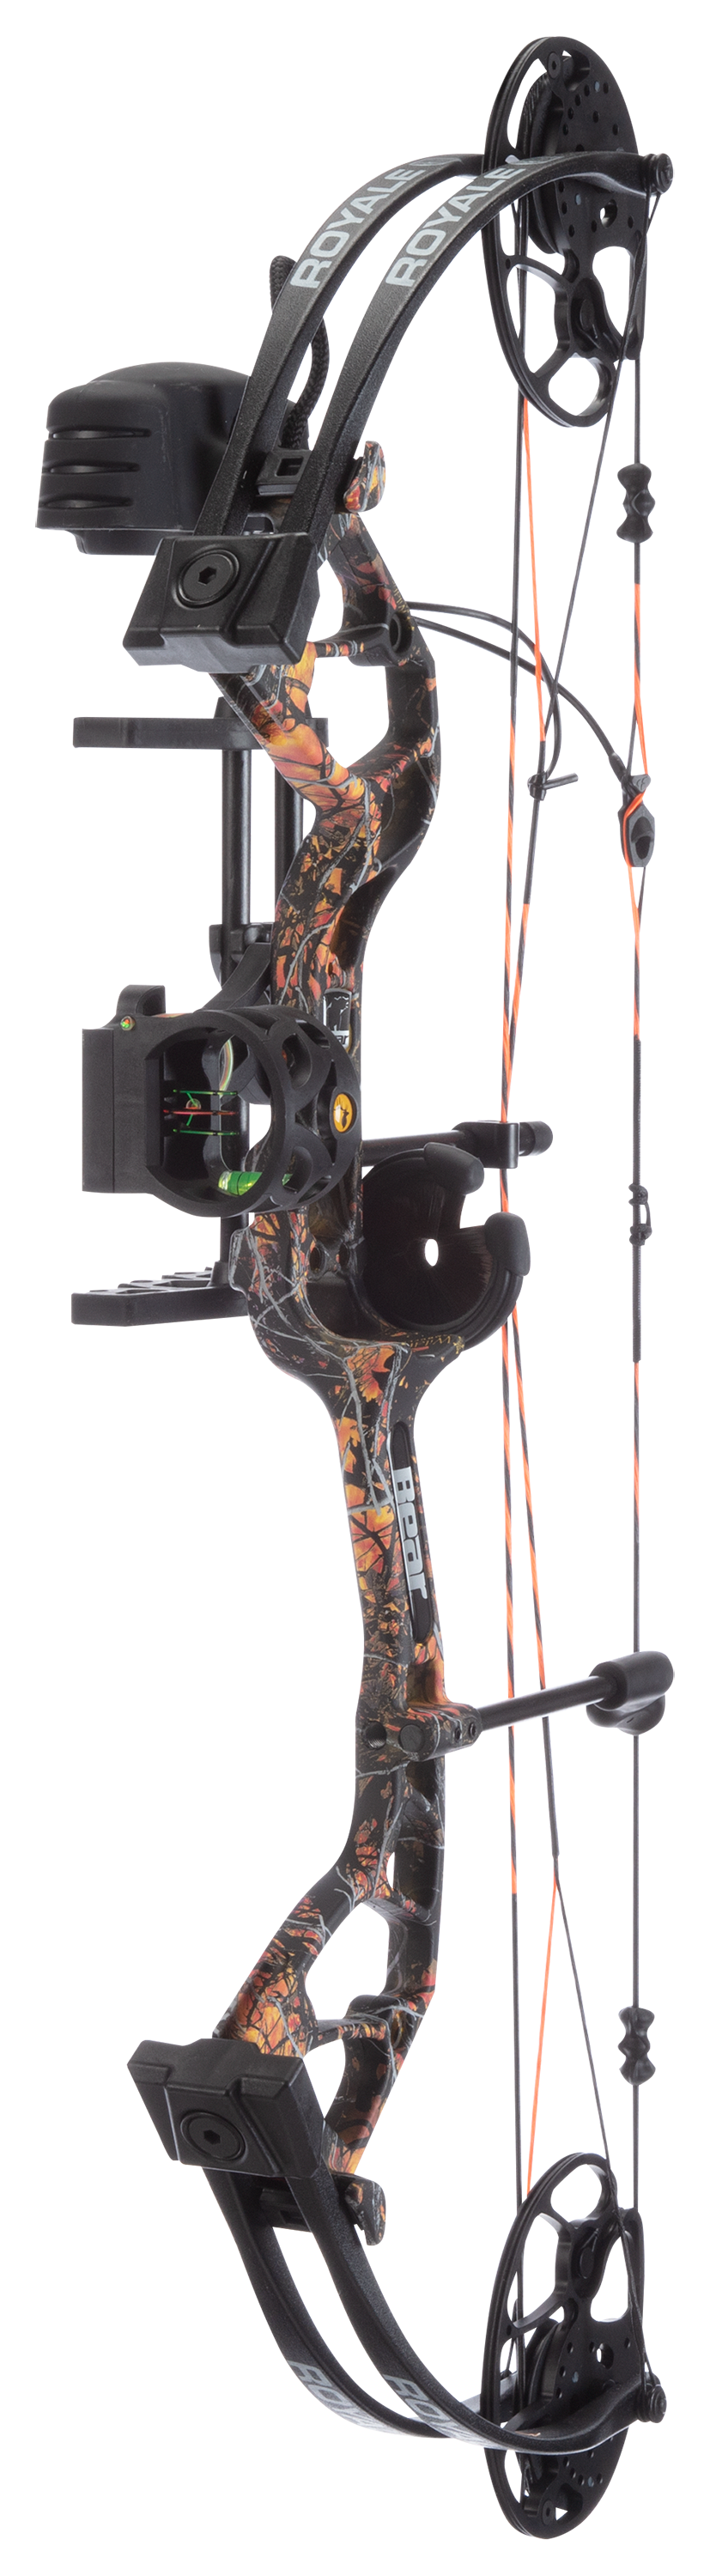 Bear Archery Royale RTH Compound Bow Package - 50 lbs. - Right Hand - Wildfire Camo